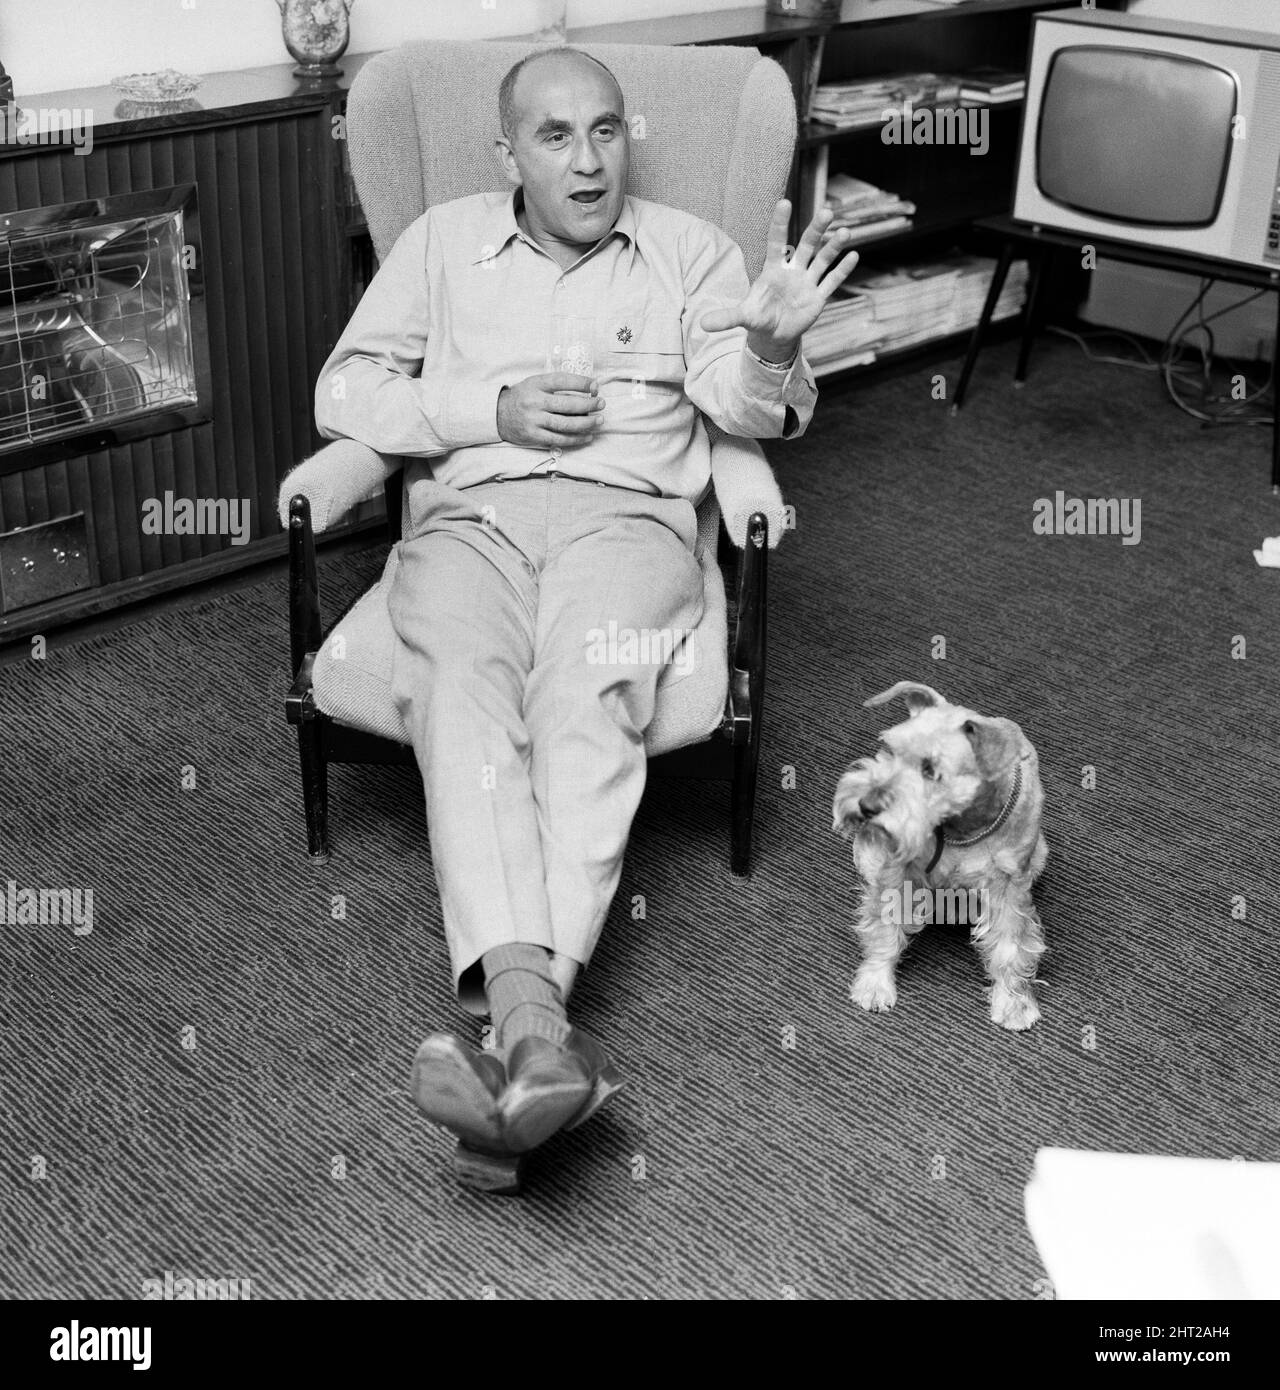 Warren Mitchell, star of  TV's Til Death Us Do Part, pictured at his home in Highgate, North London. Picture taken 12th September 1966  Til Death Us Do Part was piloted on television 22nd July 1965, and ran it's first full series from 6th June 1966 to 16th February 1968, making a star of Warren Mitchell and the TV character he played, West Ham supporting Alf Garnett. Stock Photo